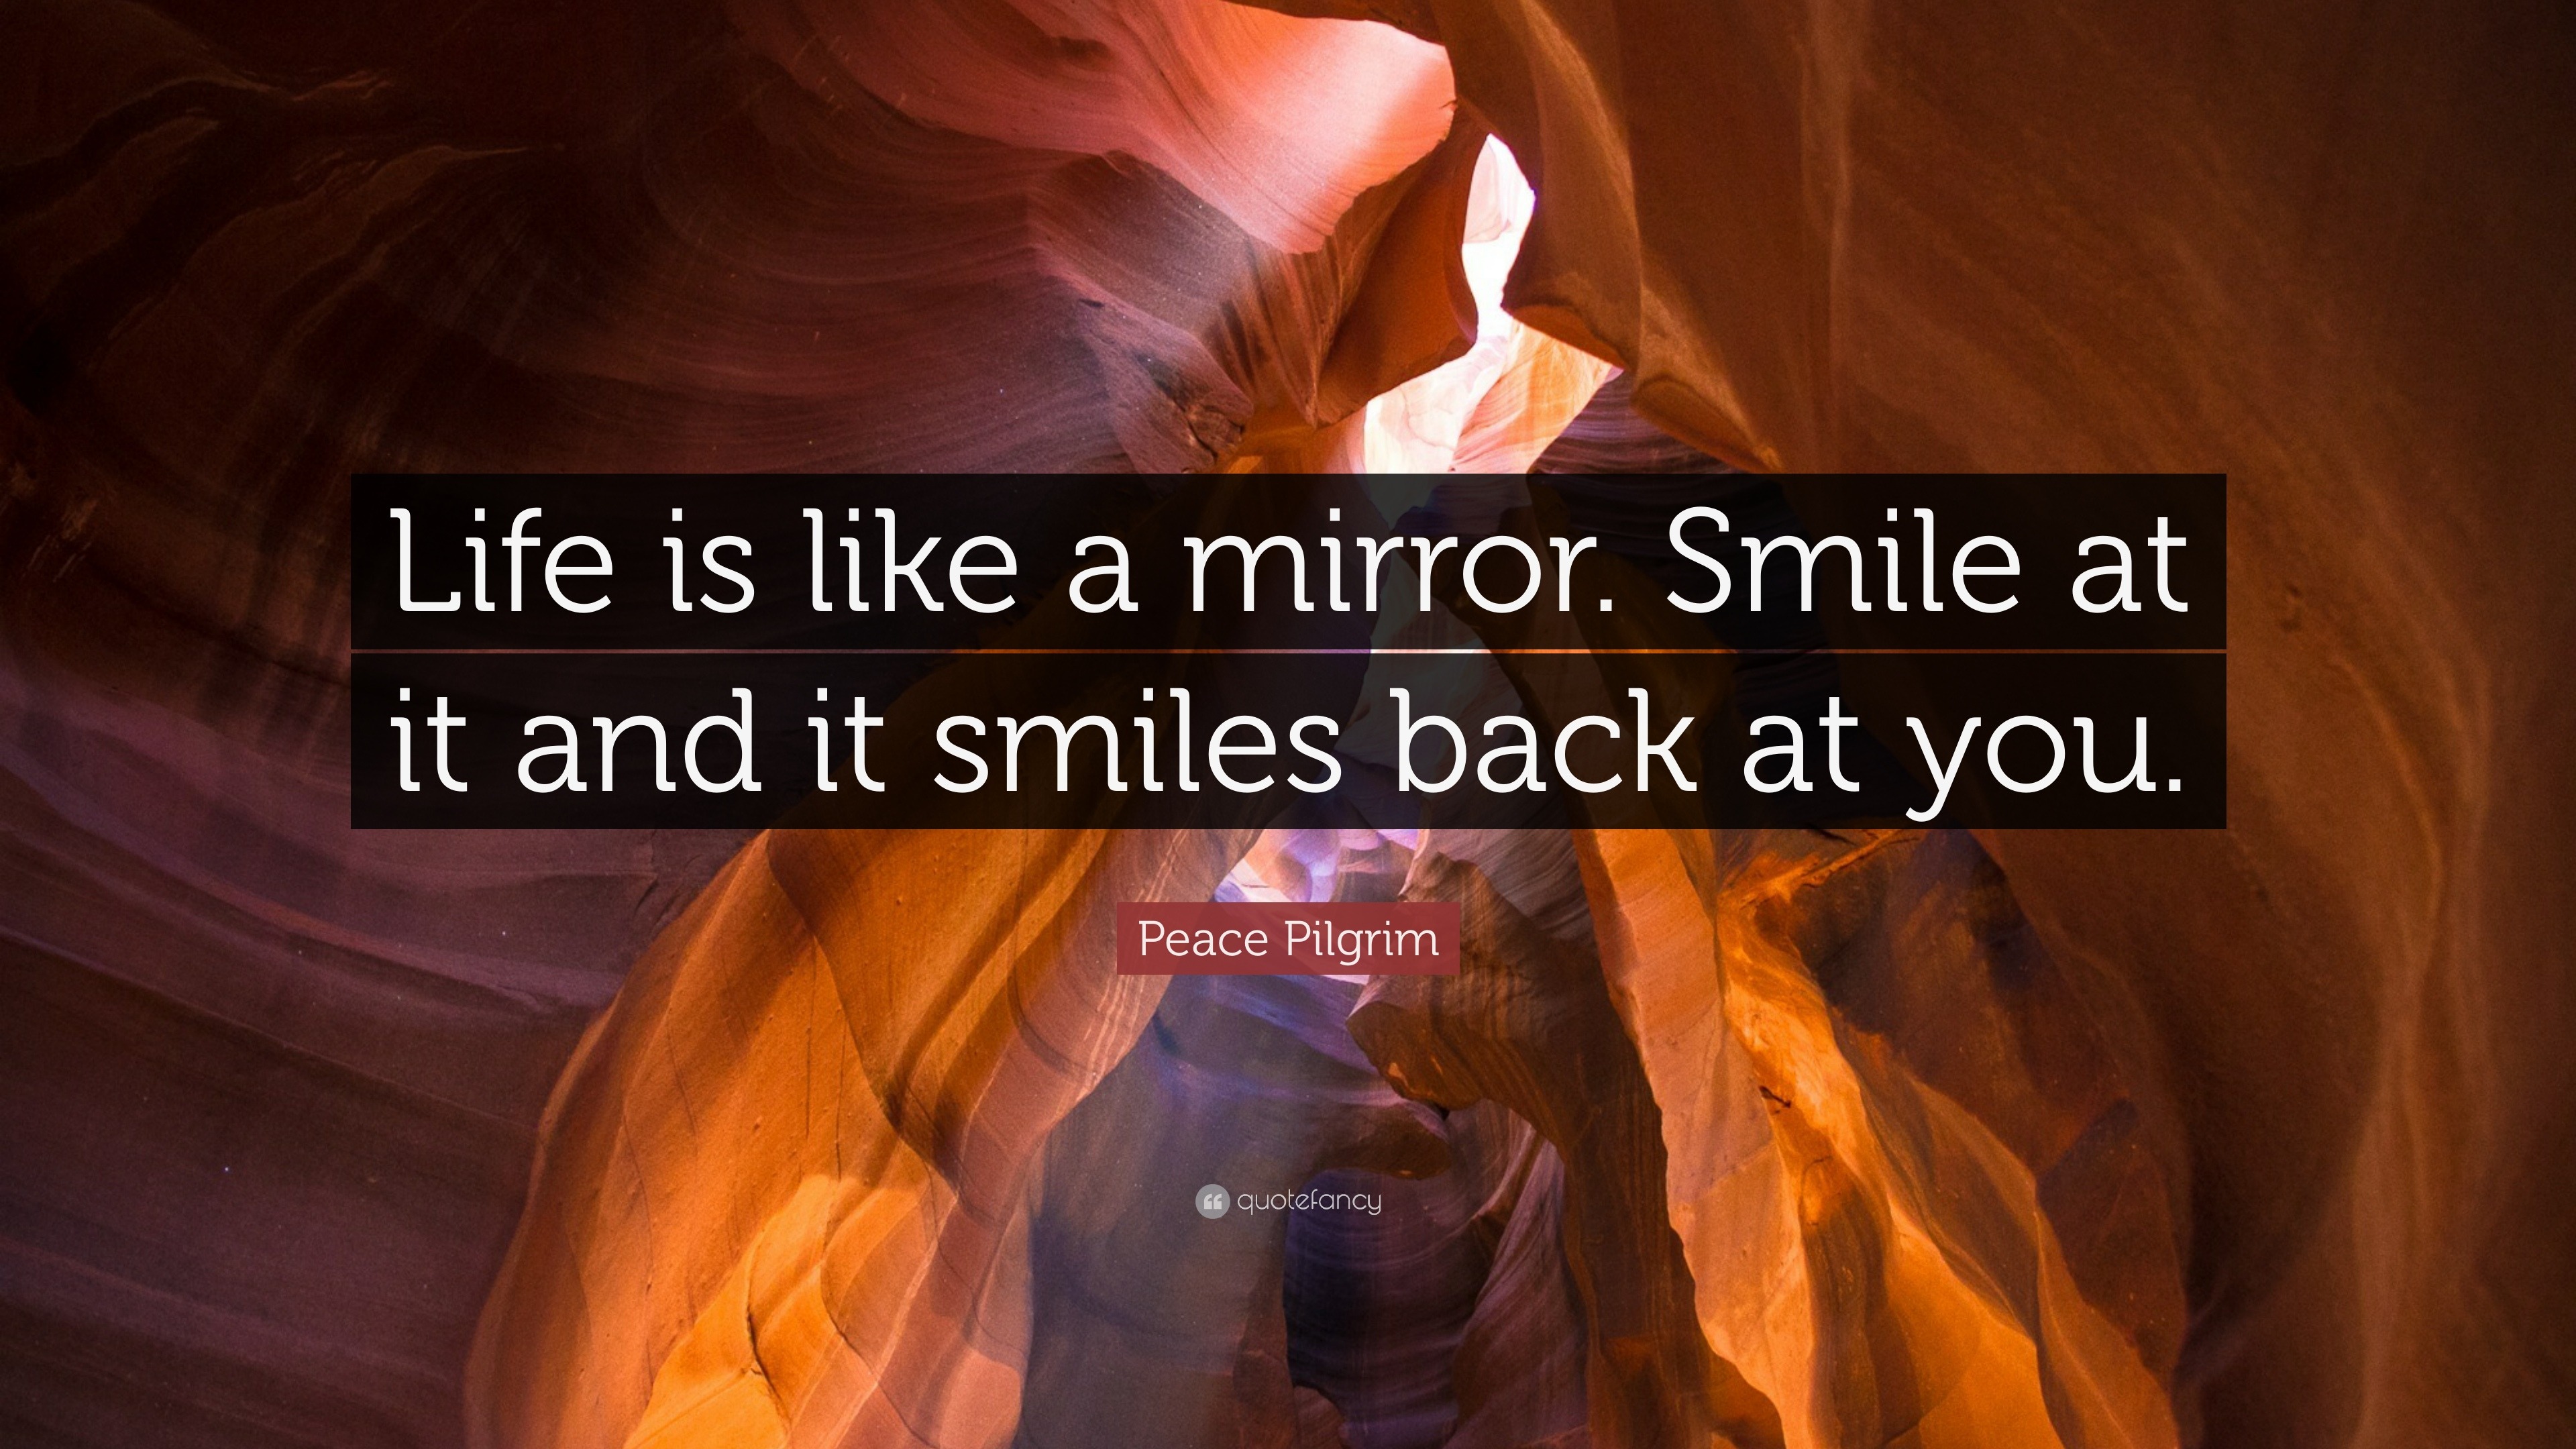 Peace Pilgrim Quote: "Life is like a mirror. Smile at it ...